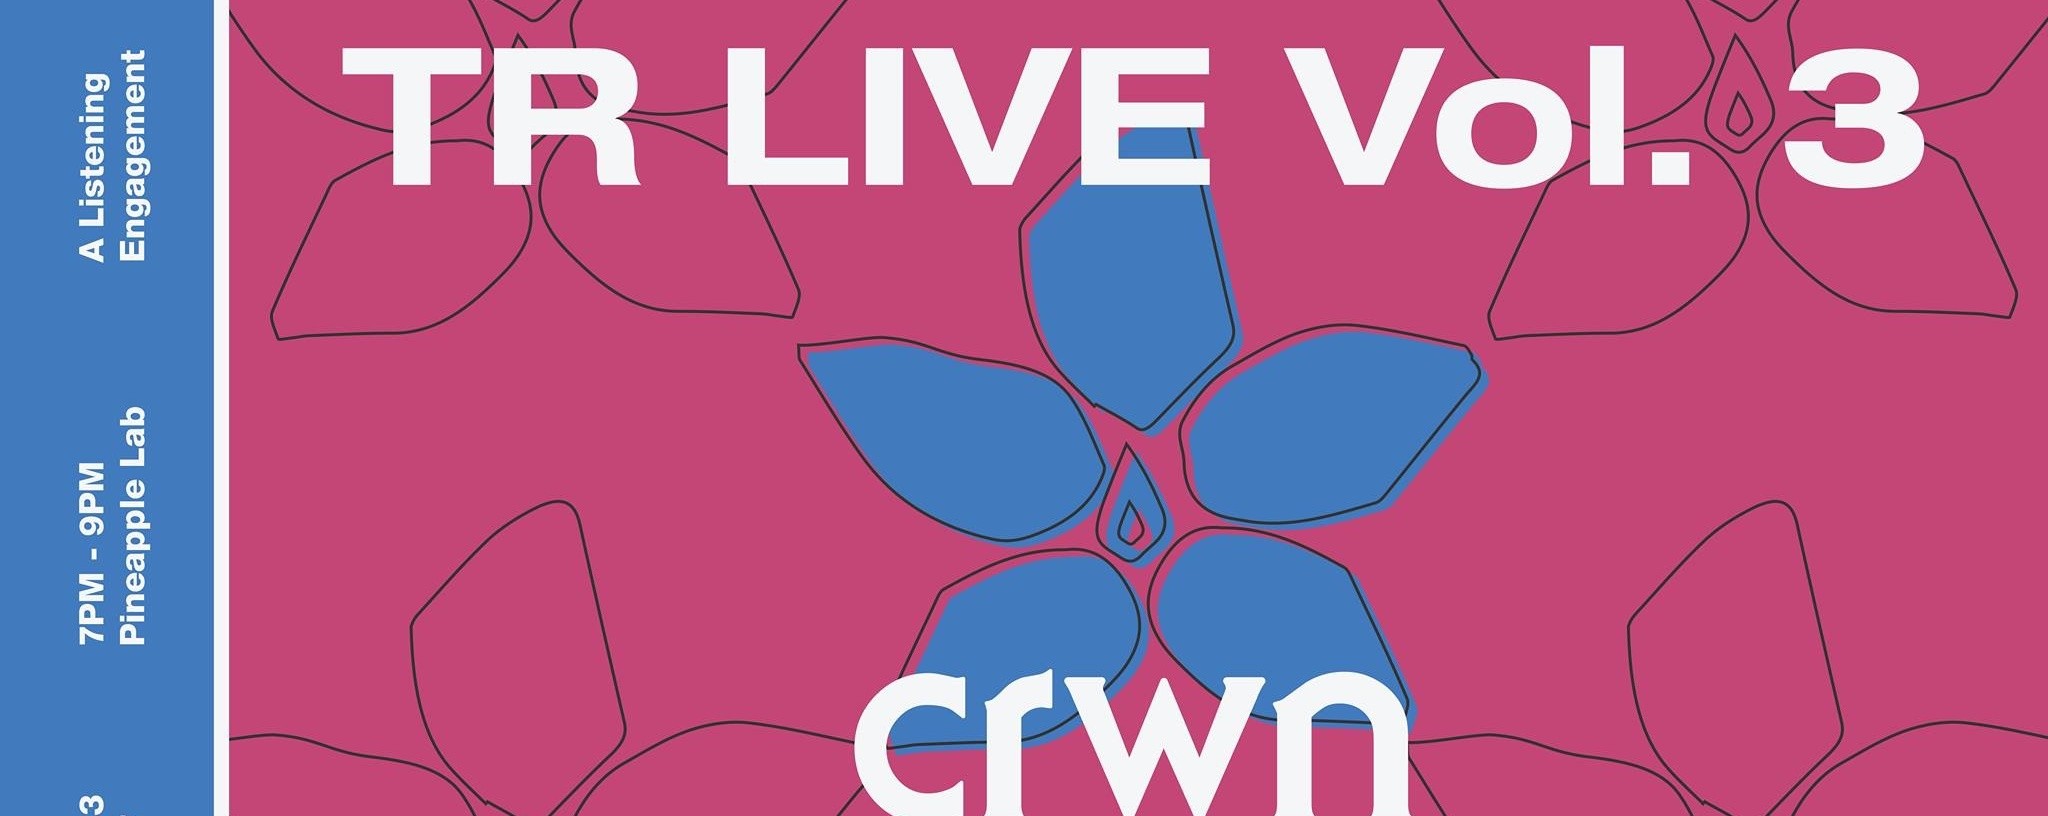 TR LIVE Vol. 3 curated by crwn